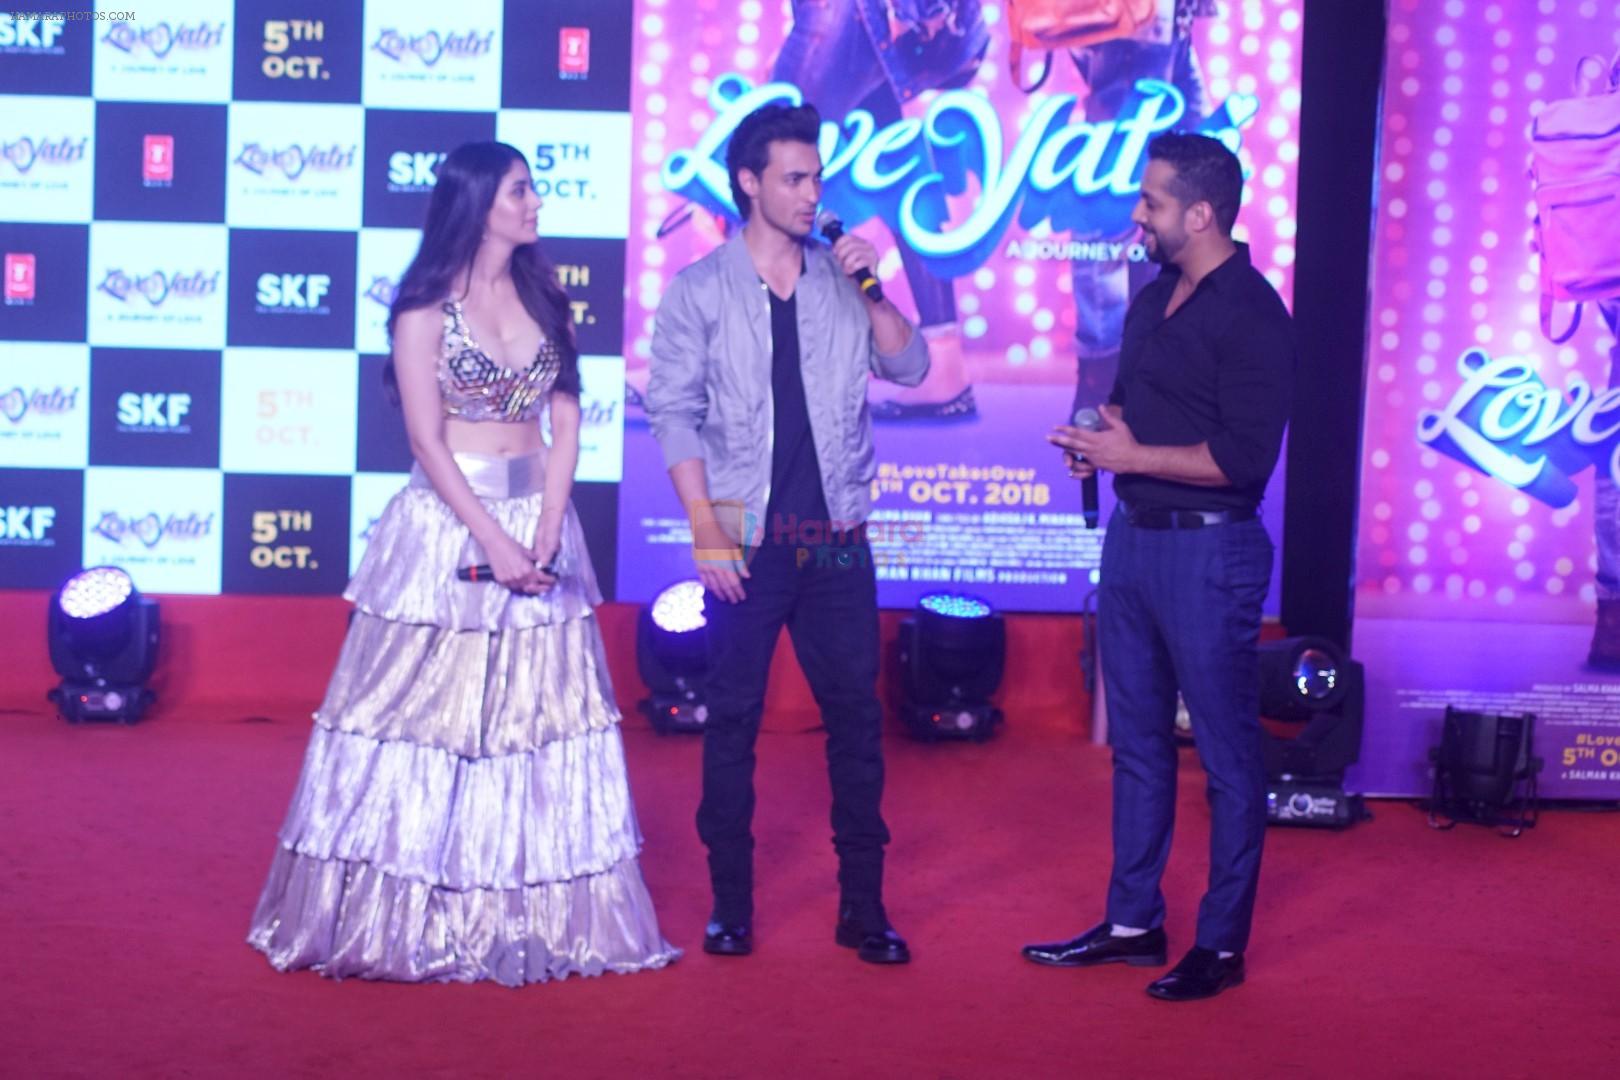 Aayush Sharma, Warina Hussain at Musical Concert Celebrating the journey of Loveyatri on 26th Sept 2018